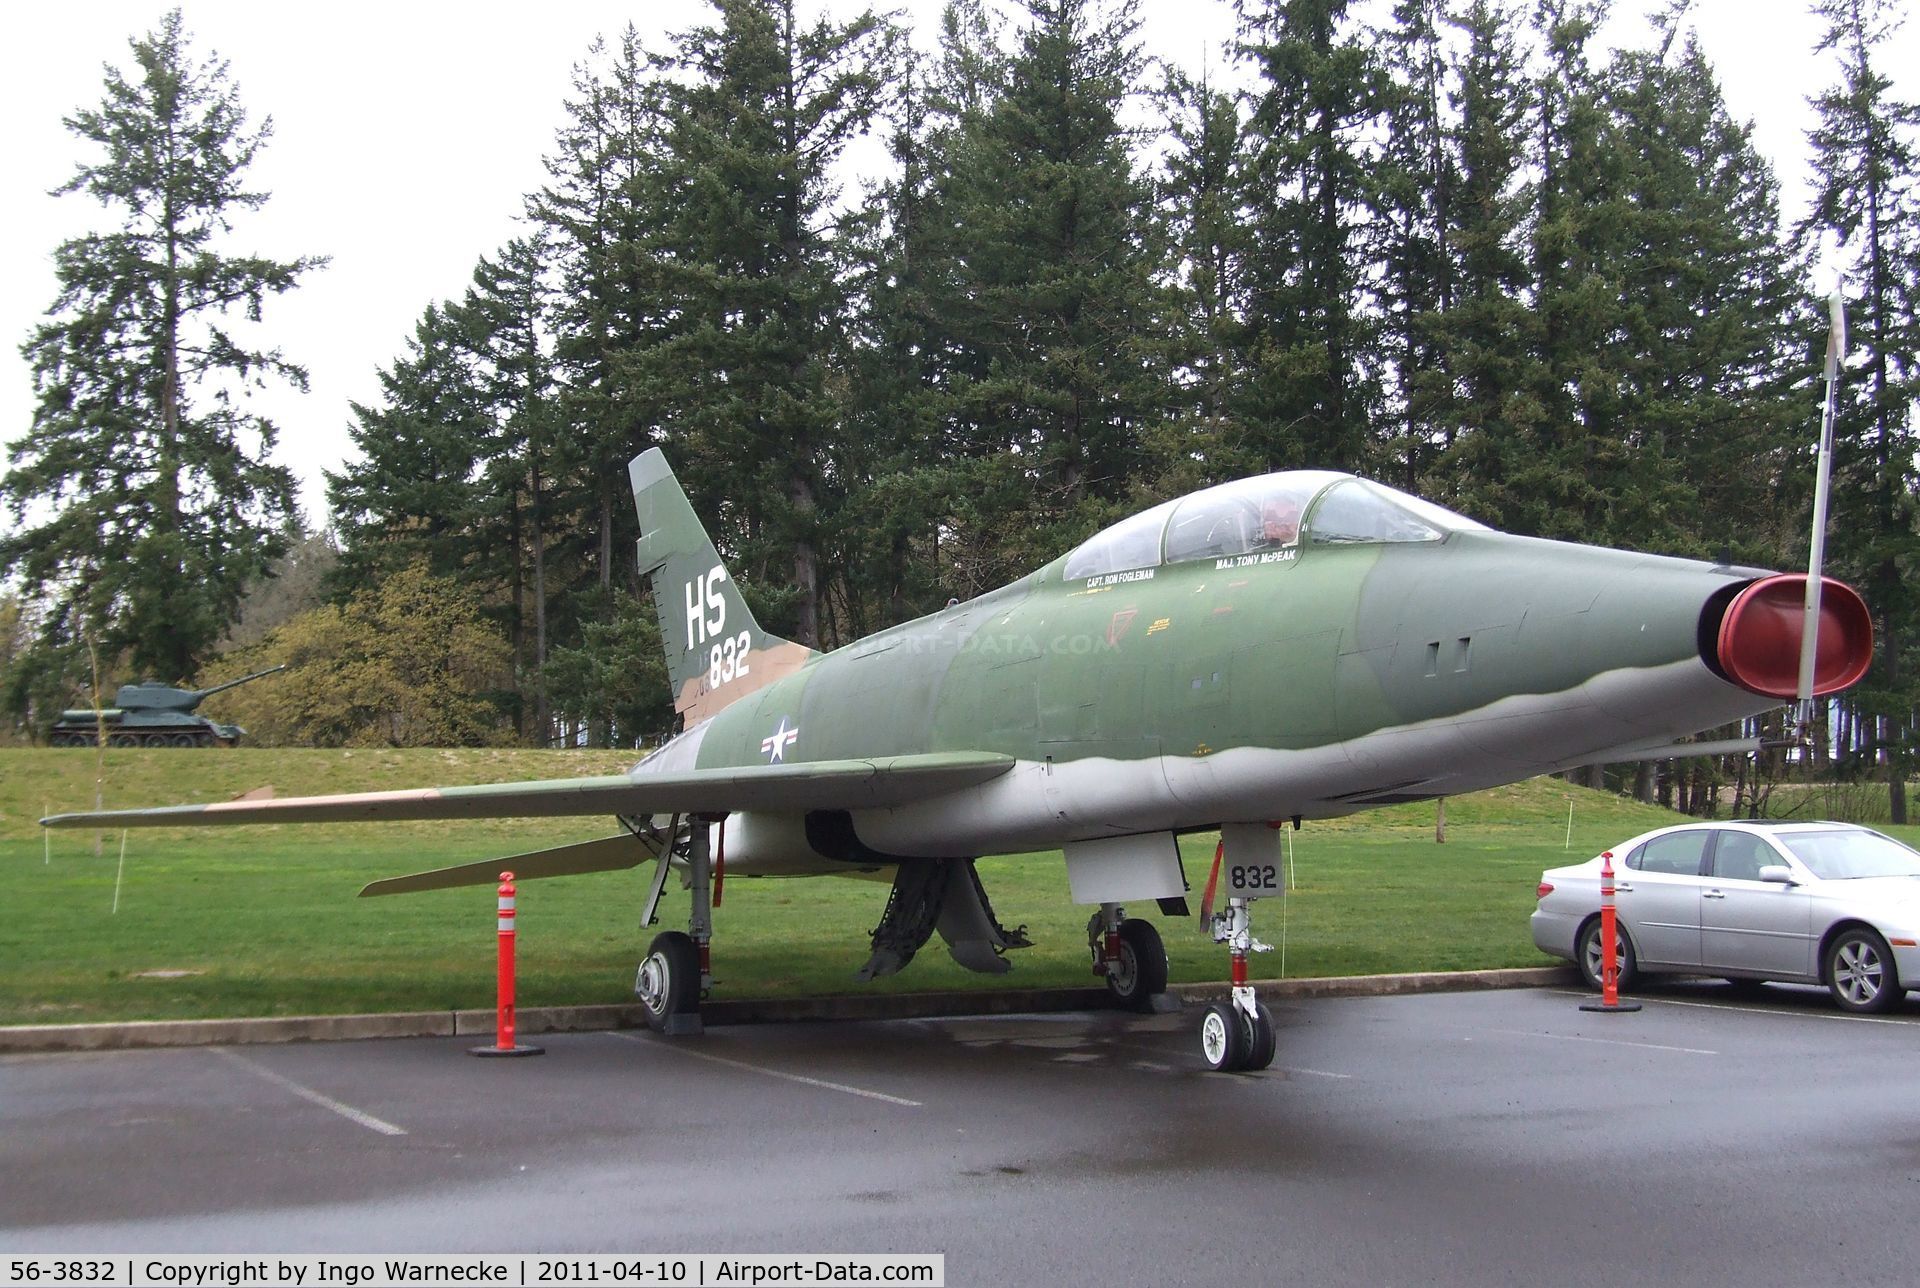 56-3832, 1956 North American QF-100F Super Sabre C/N 243-105, North American QF-100F Super Sabre at the Evergreen Aviation & Space Museum, McMinnville OR